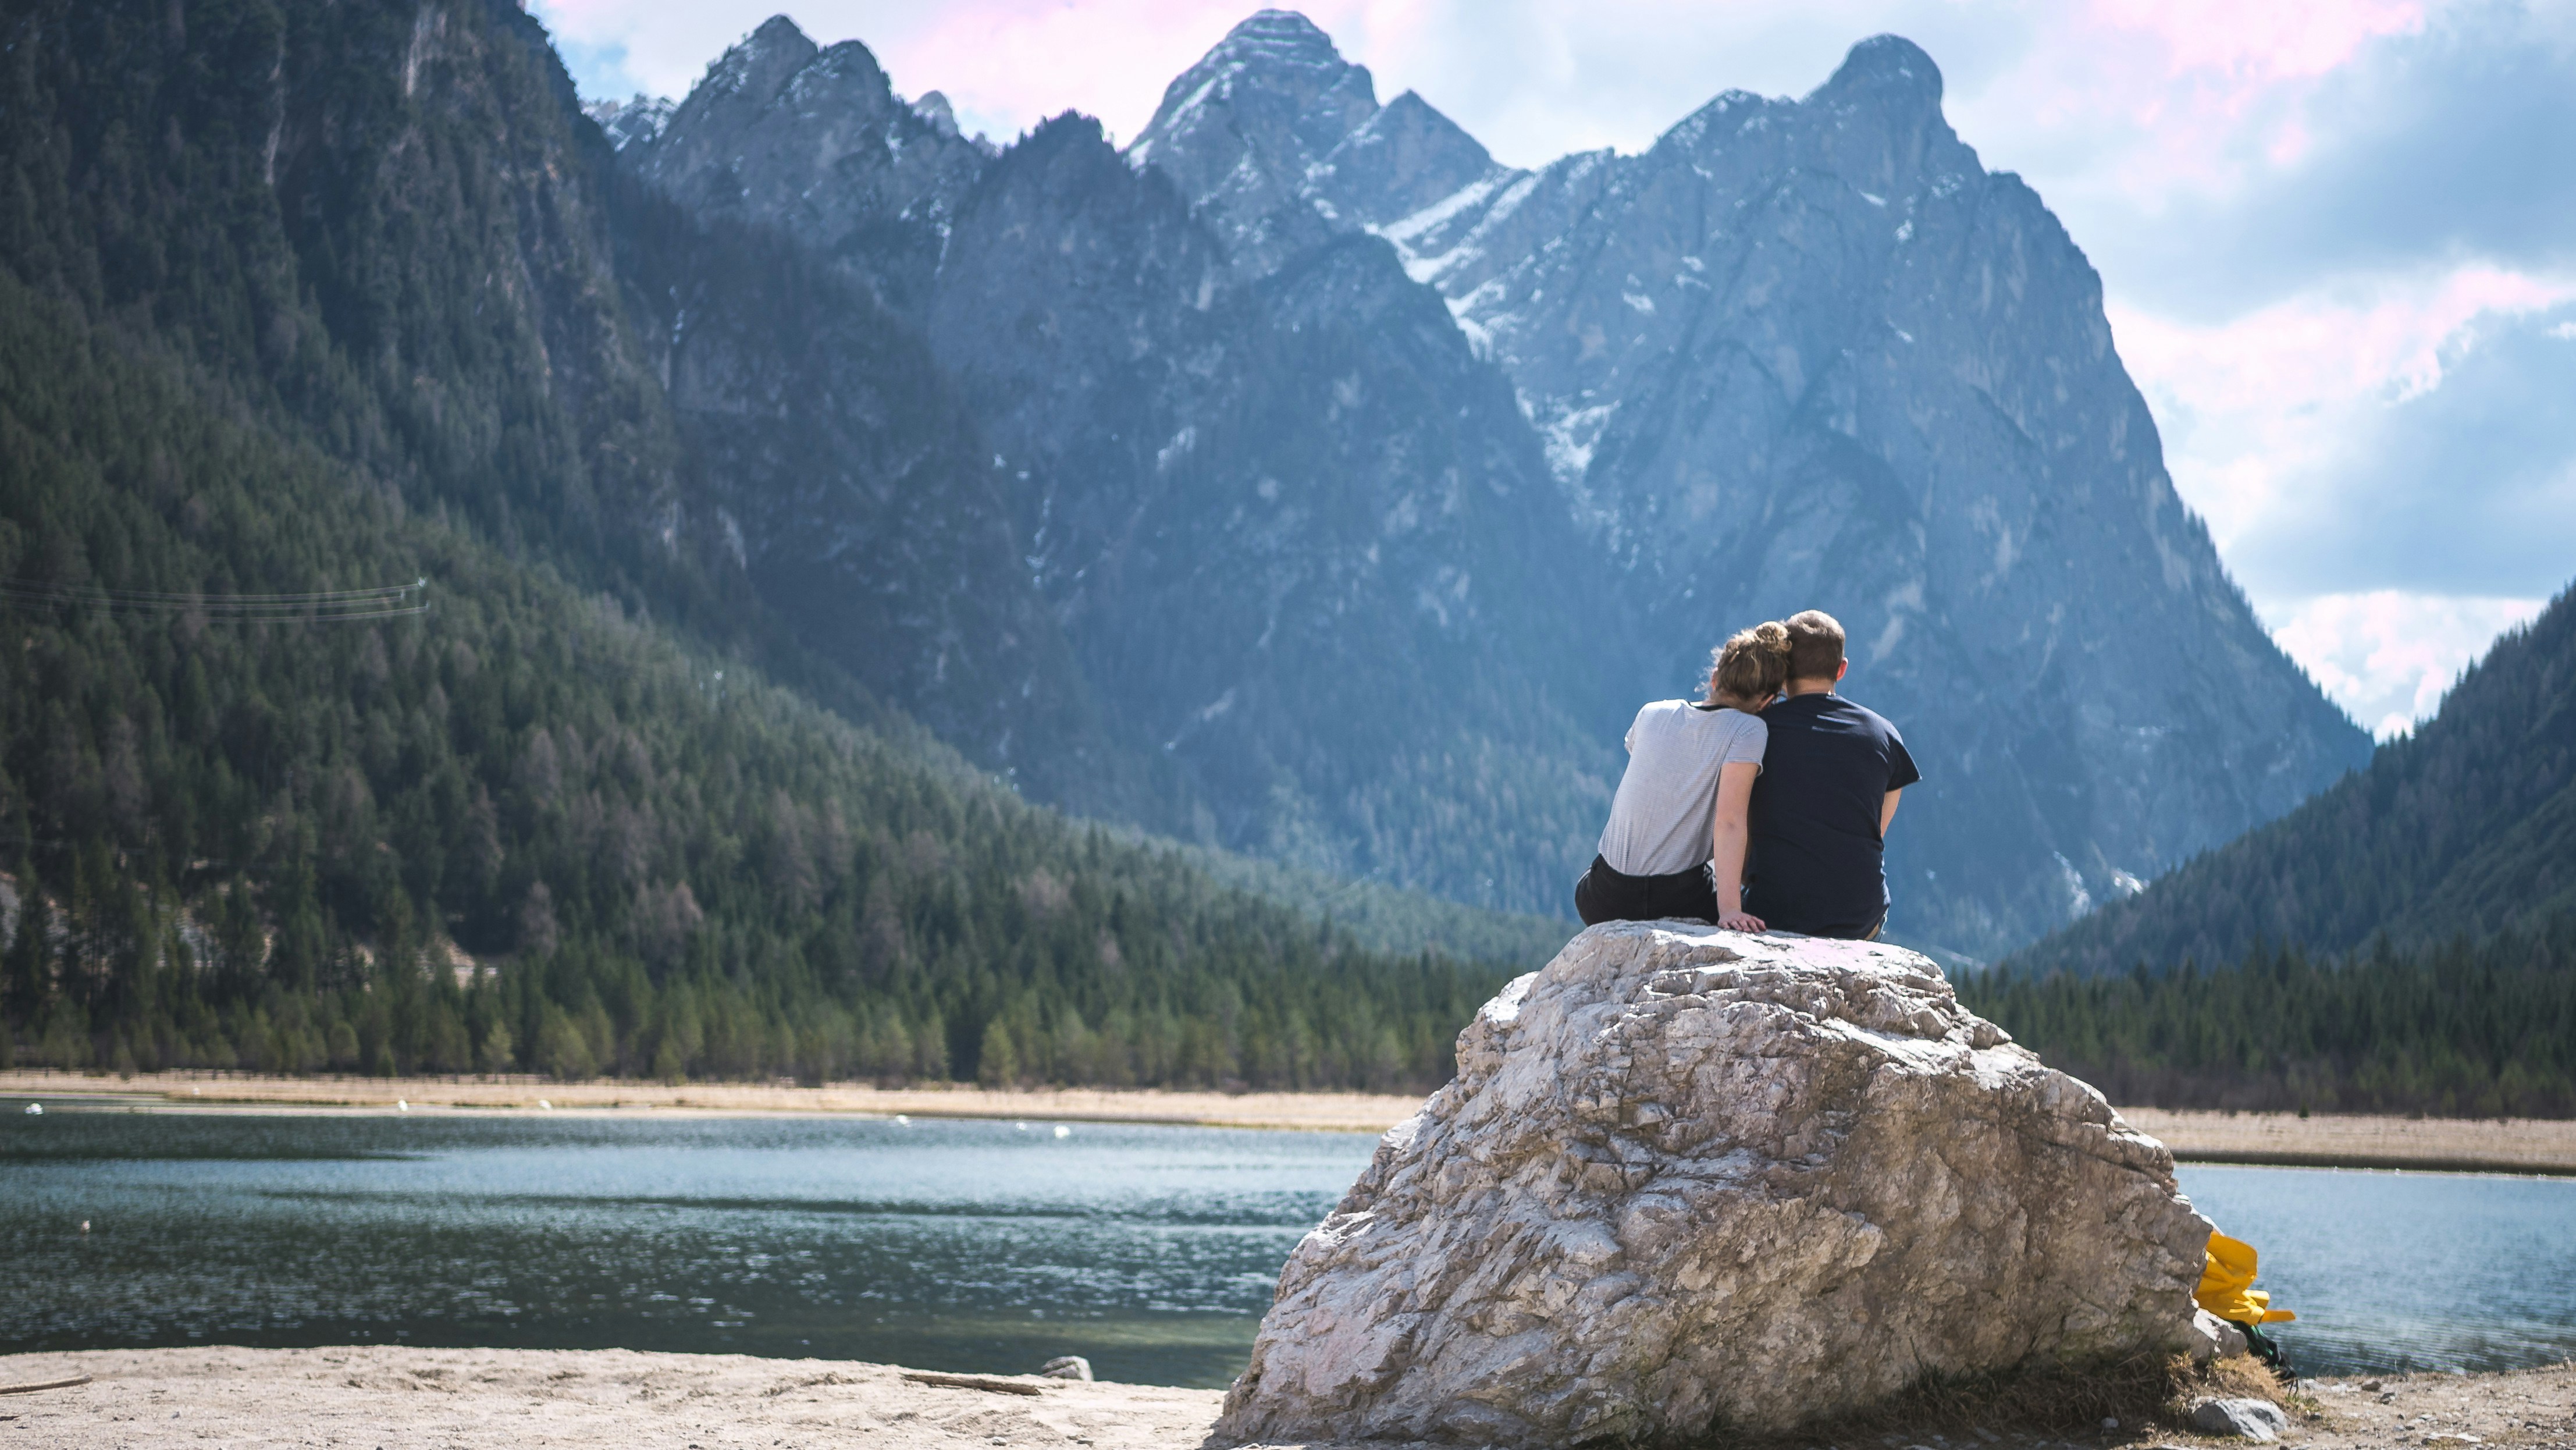 great photo recipe,how to photograph a couple sits on a rock looking out over a lake